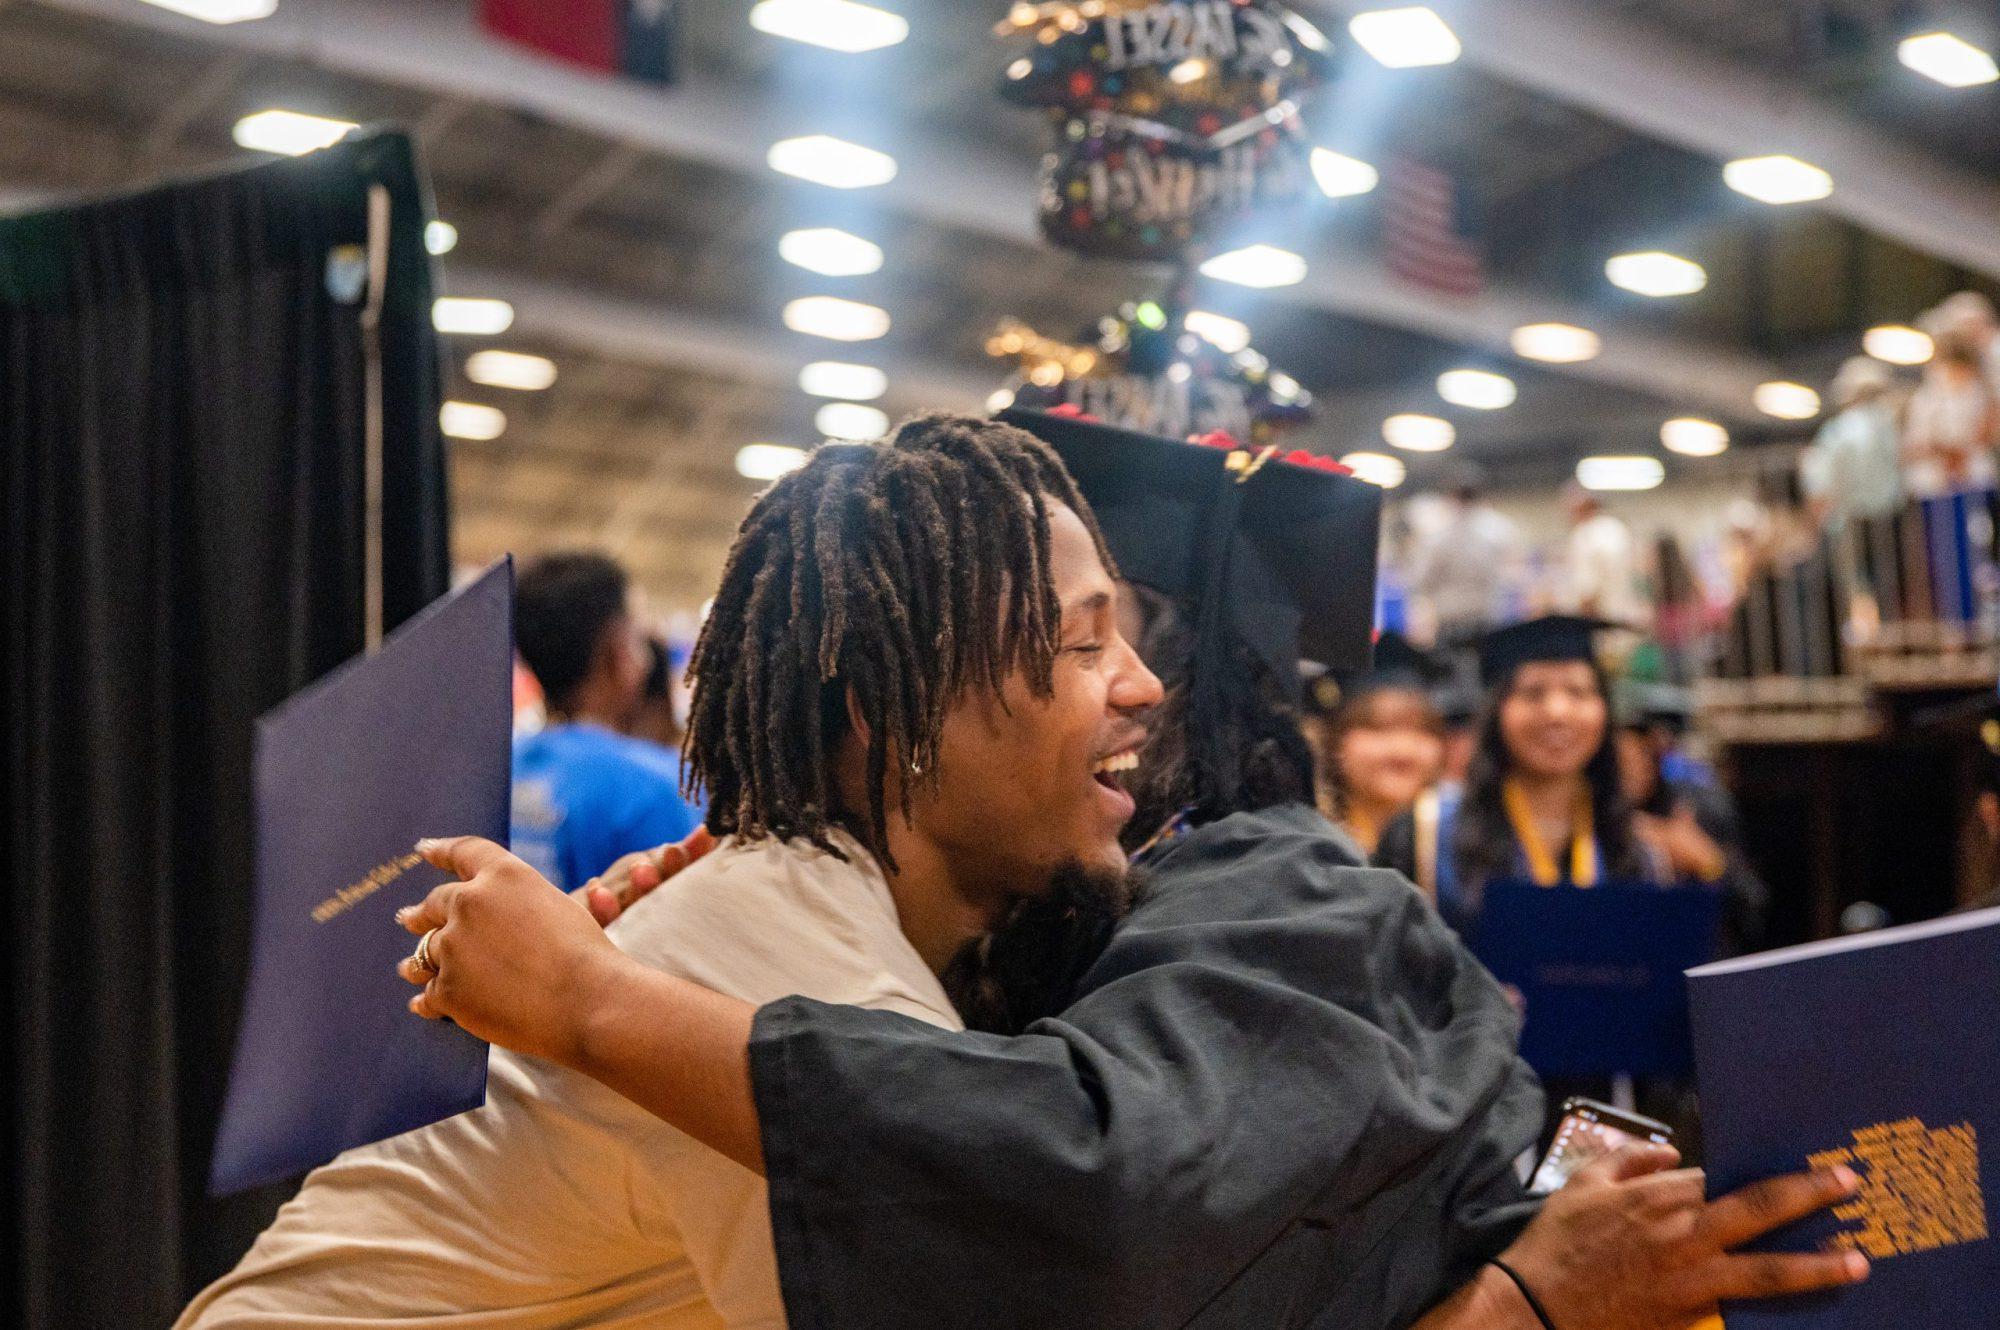 A student graduating and being hug by someone they know.